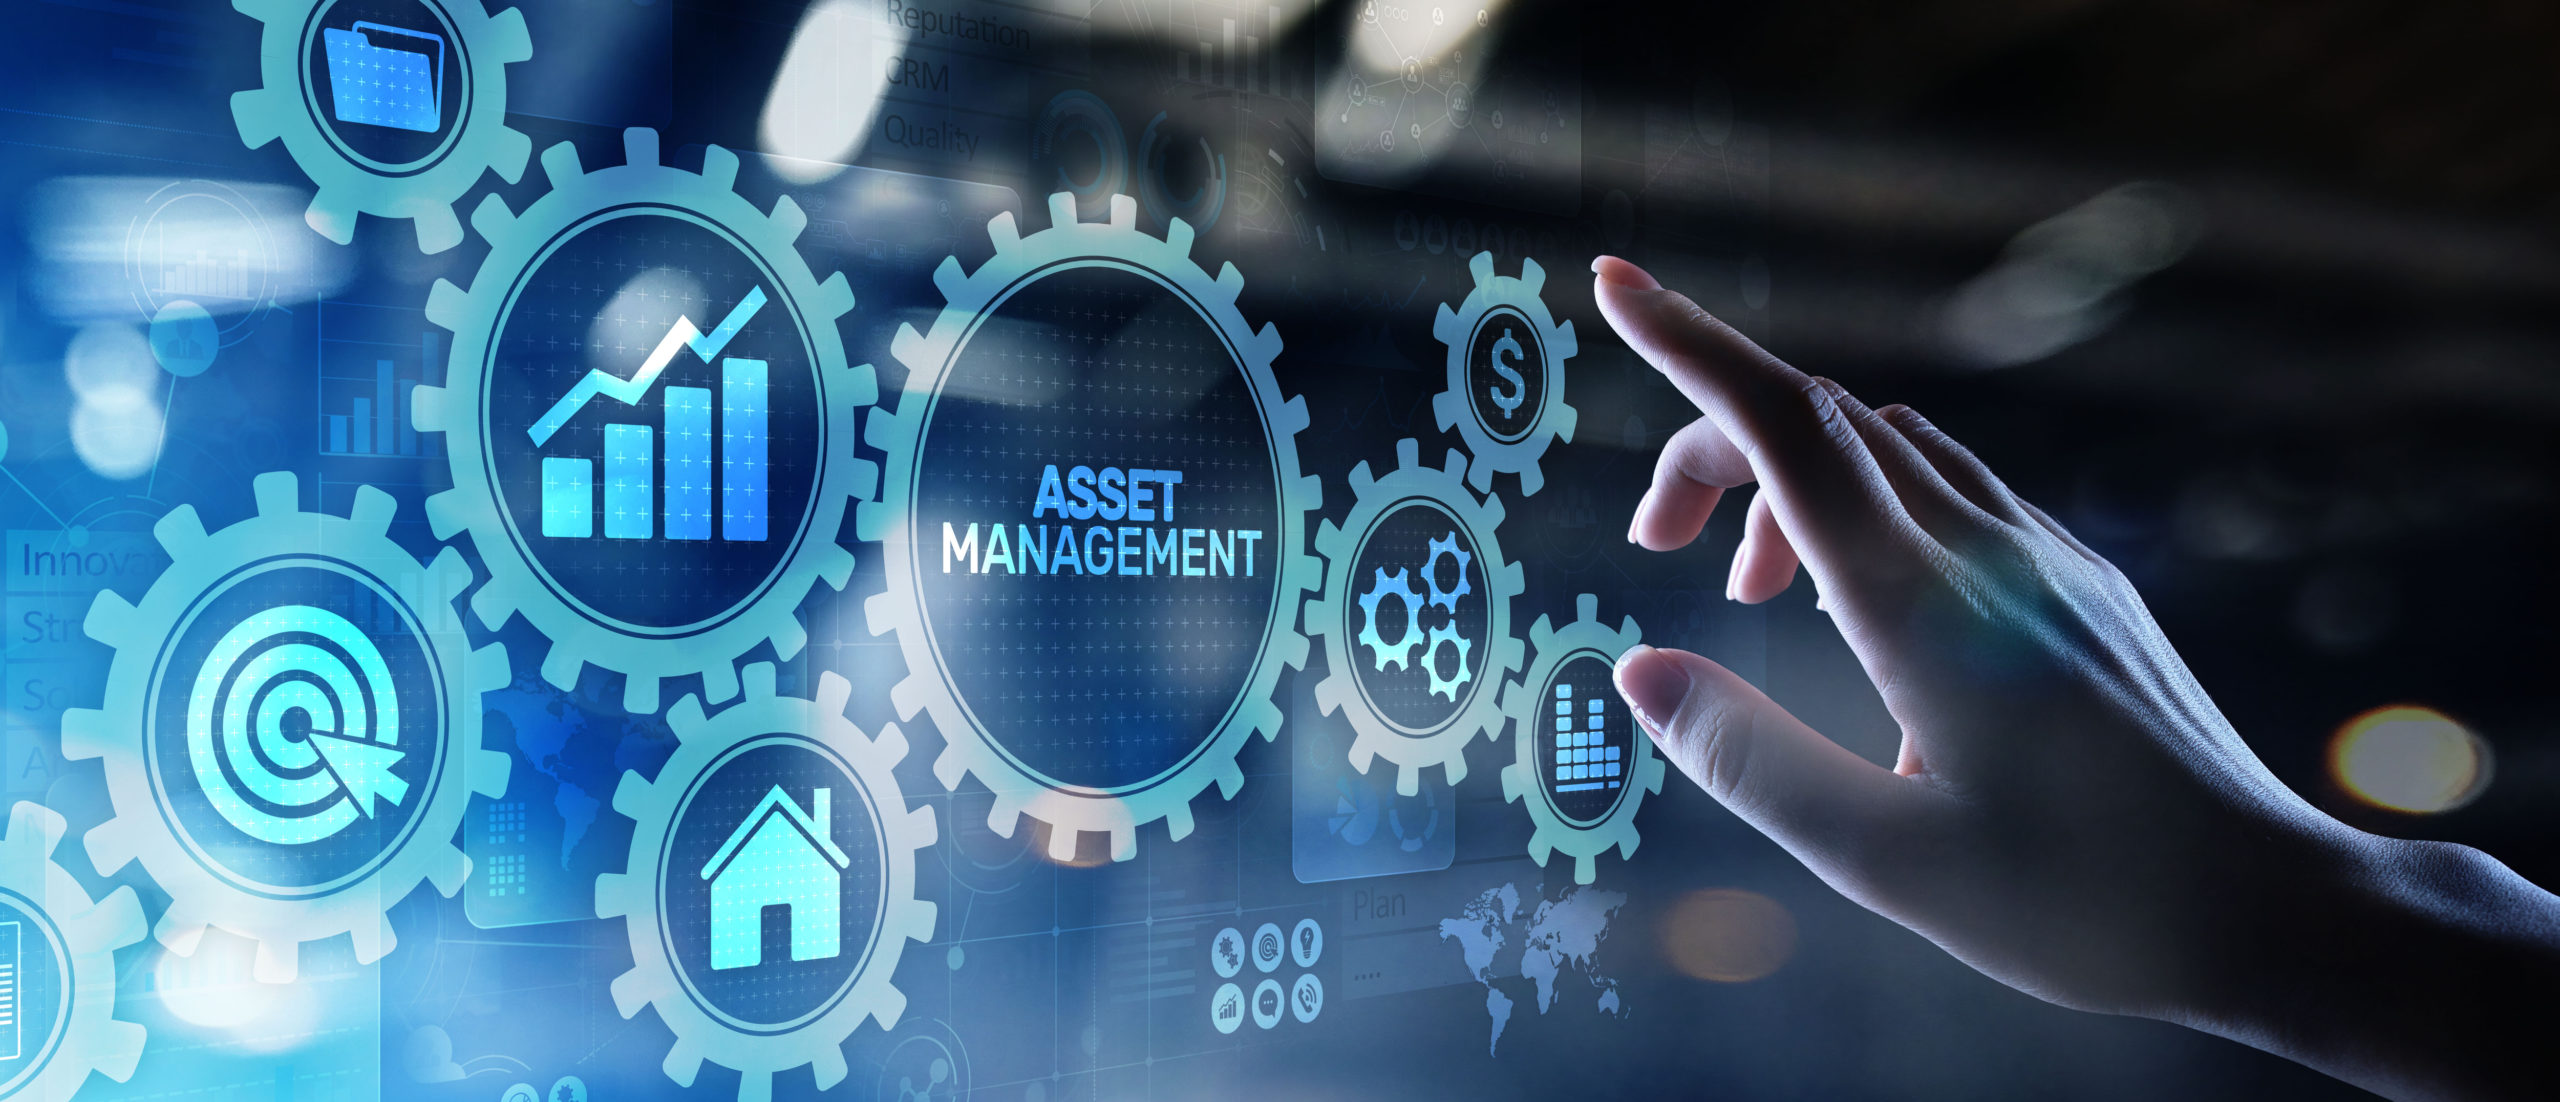 Asset Management Sappington, MO | Financial Planners | Investment Advisors | Wealth Management